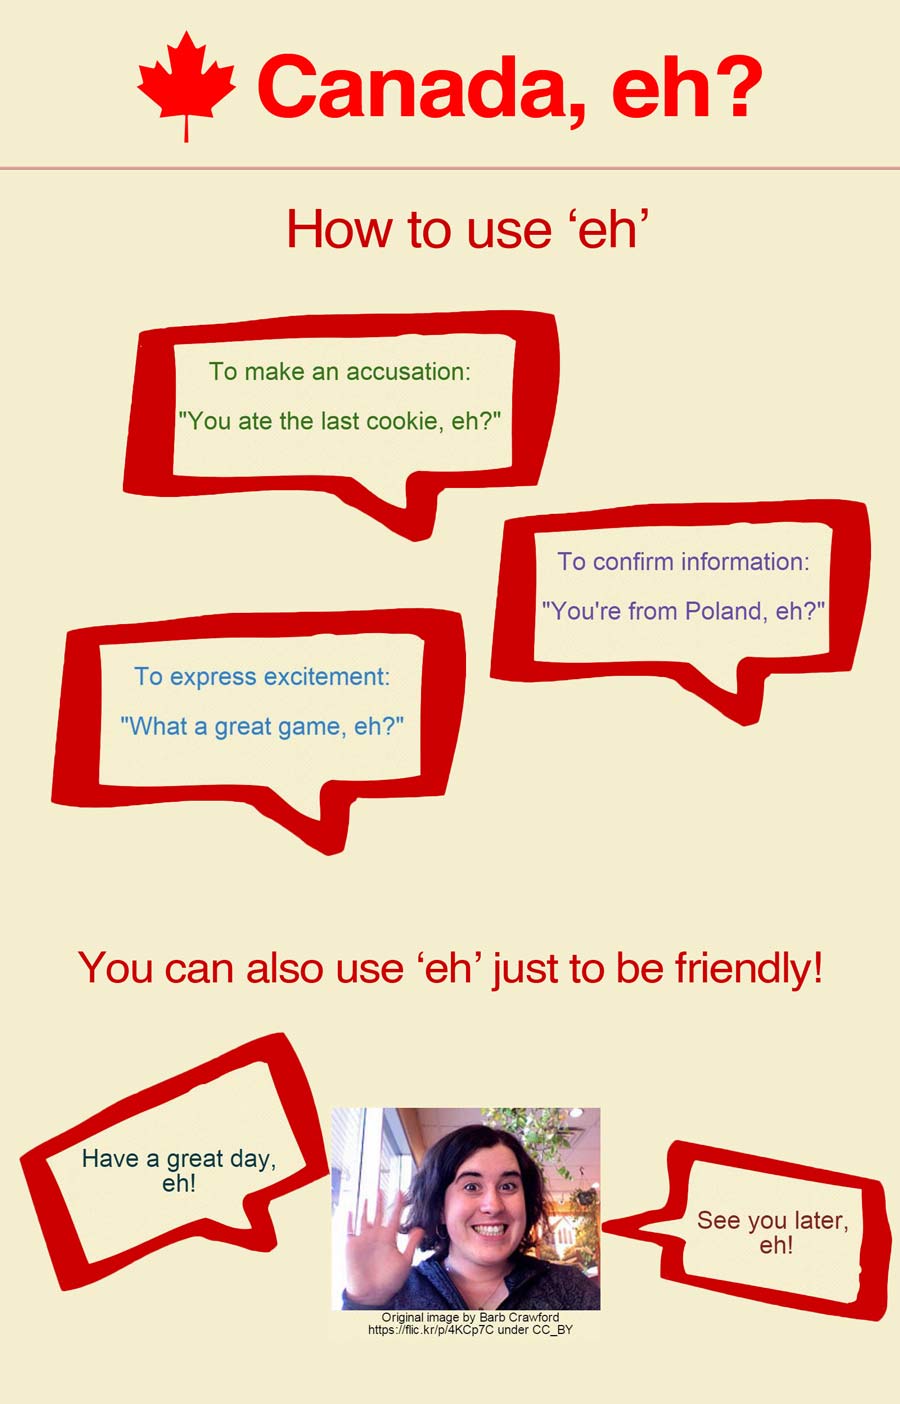 Eh? infographic: To make an accusation - "You ate the last cookie, eh?"; To confirm information - "You're from Poland, eh?"; To express excitement - "What a great game, eh?"; You can also use "eh" just to be friendly - "Have a great day, eh?"